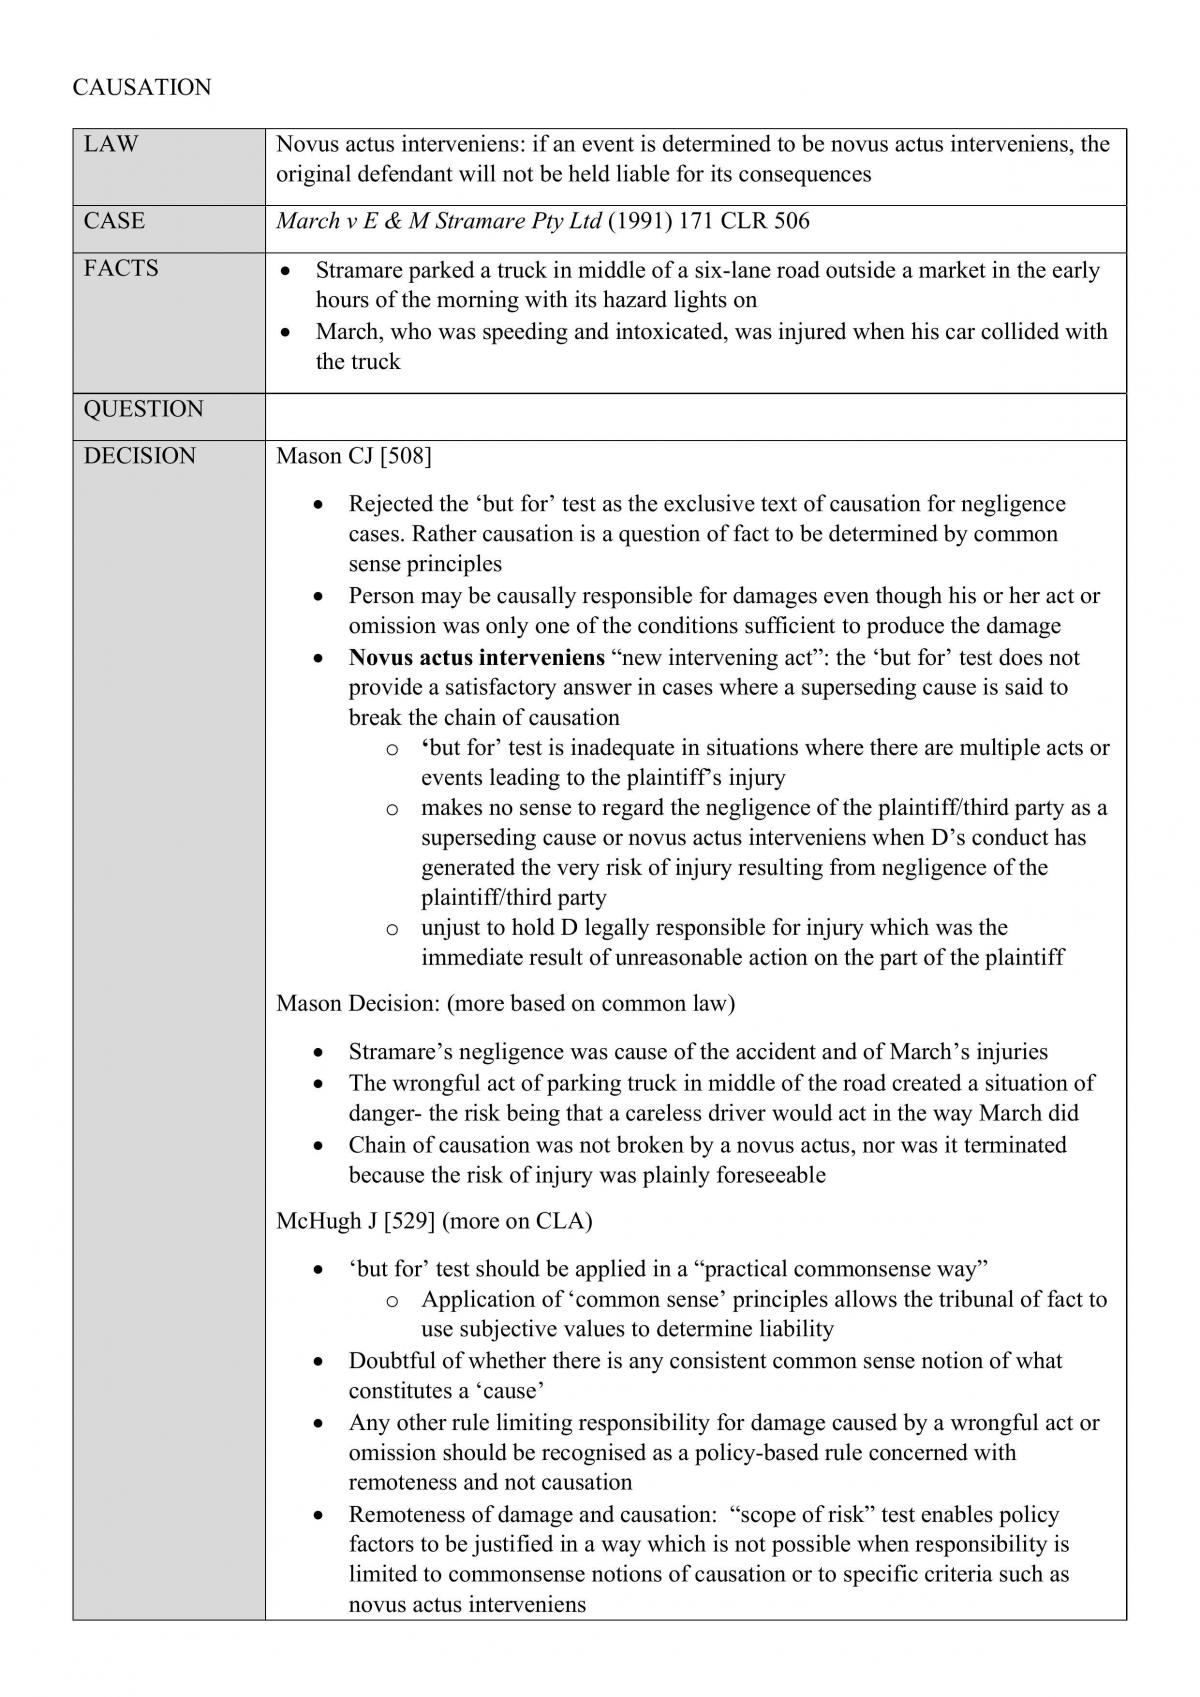 LAWS1061 Case Briefs for all cases in Causation topic - Page 1